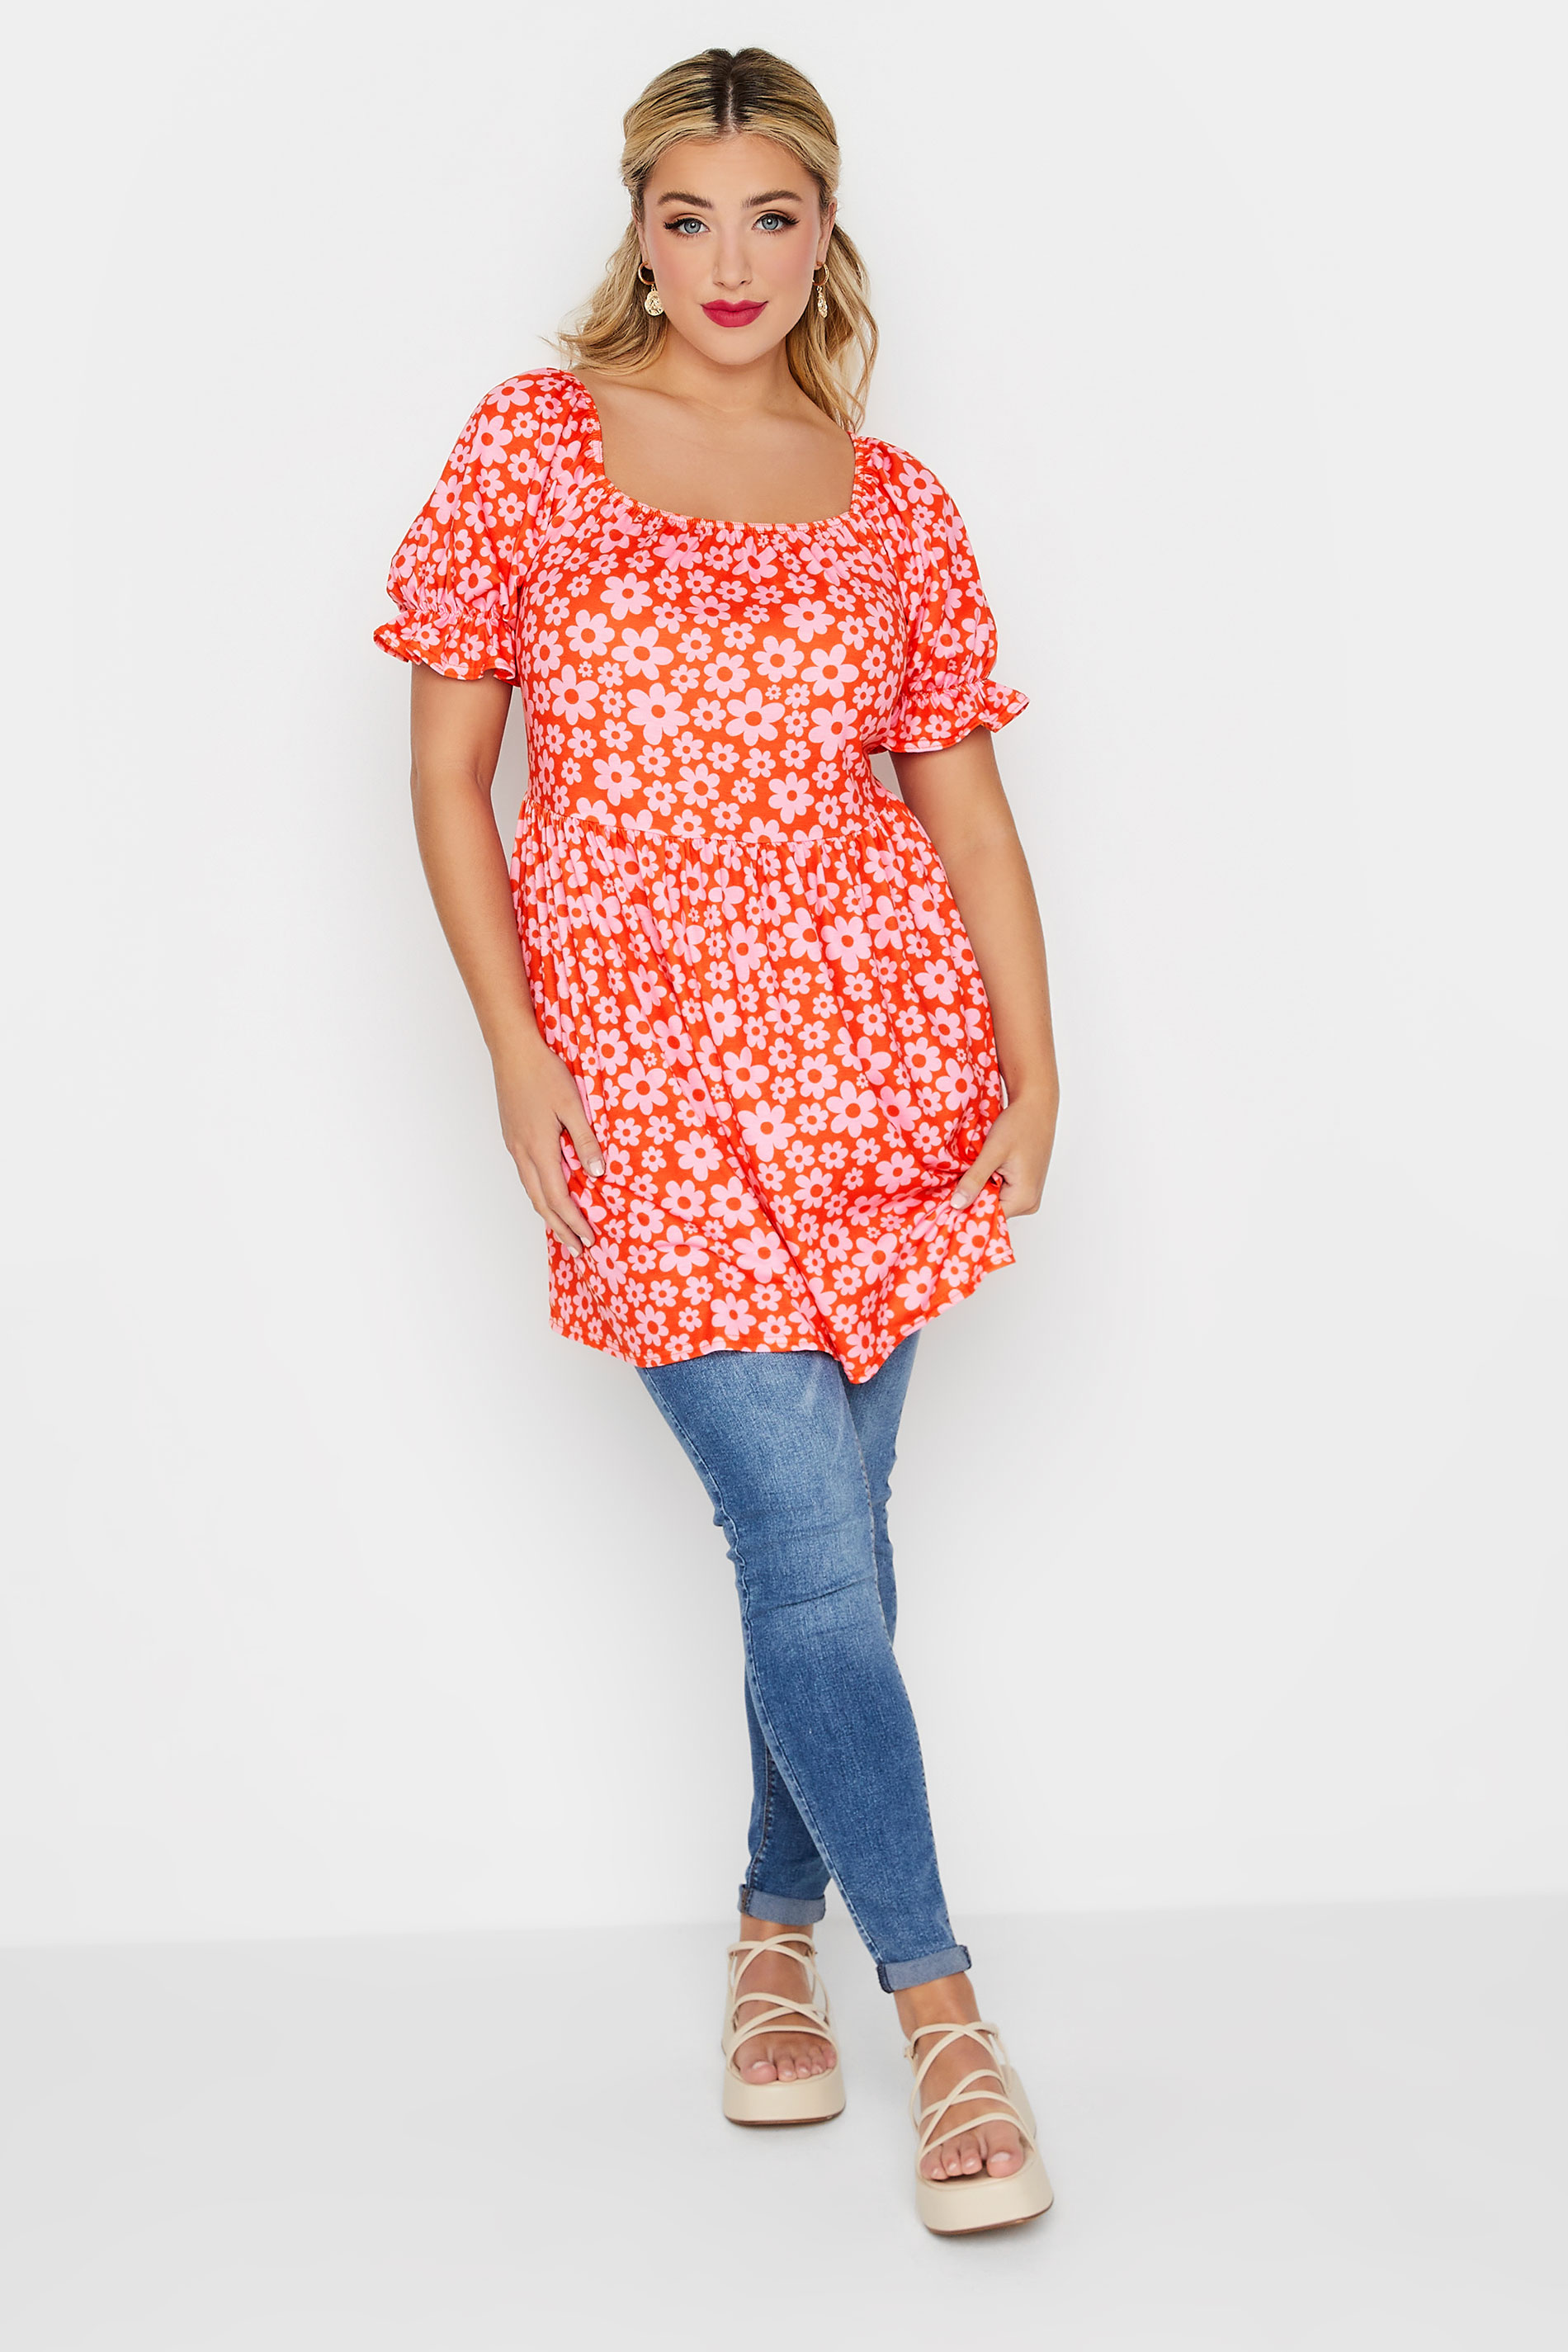 LIMITED COLLECTION Plus Size Pink Retro Floral Print Top | Yours Clothing  2